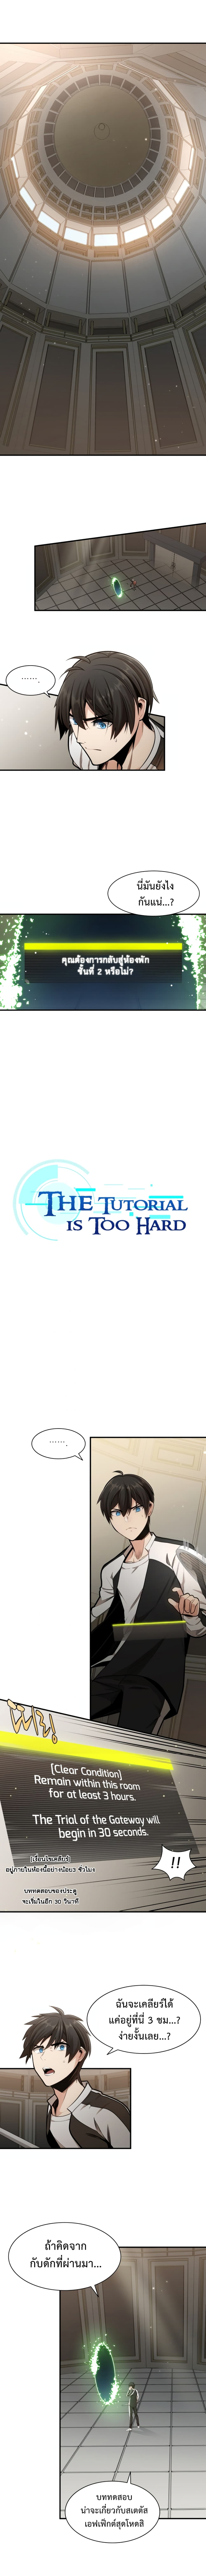 The Tutorial is Too Hard 15-15